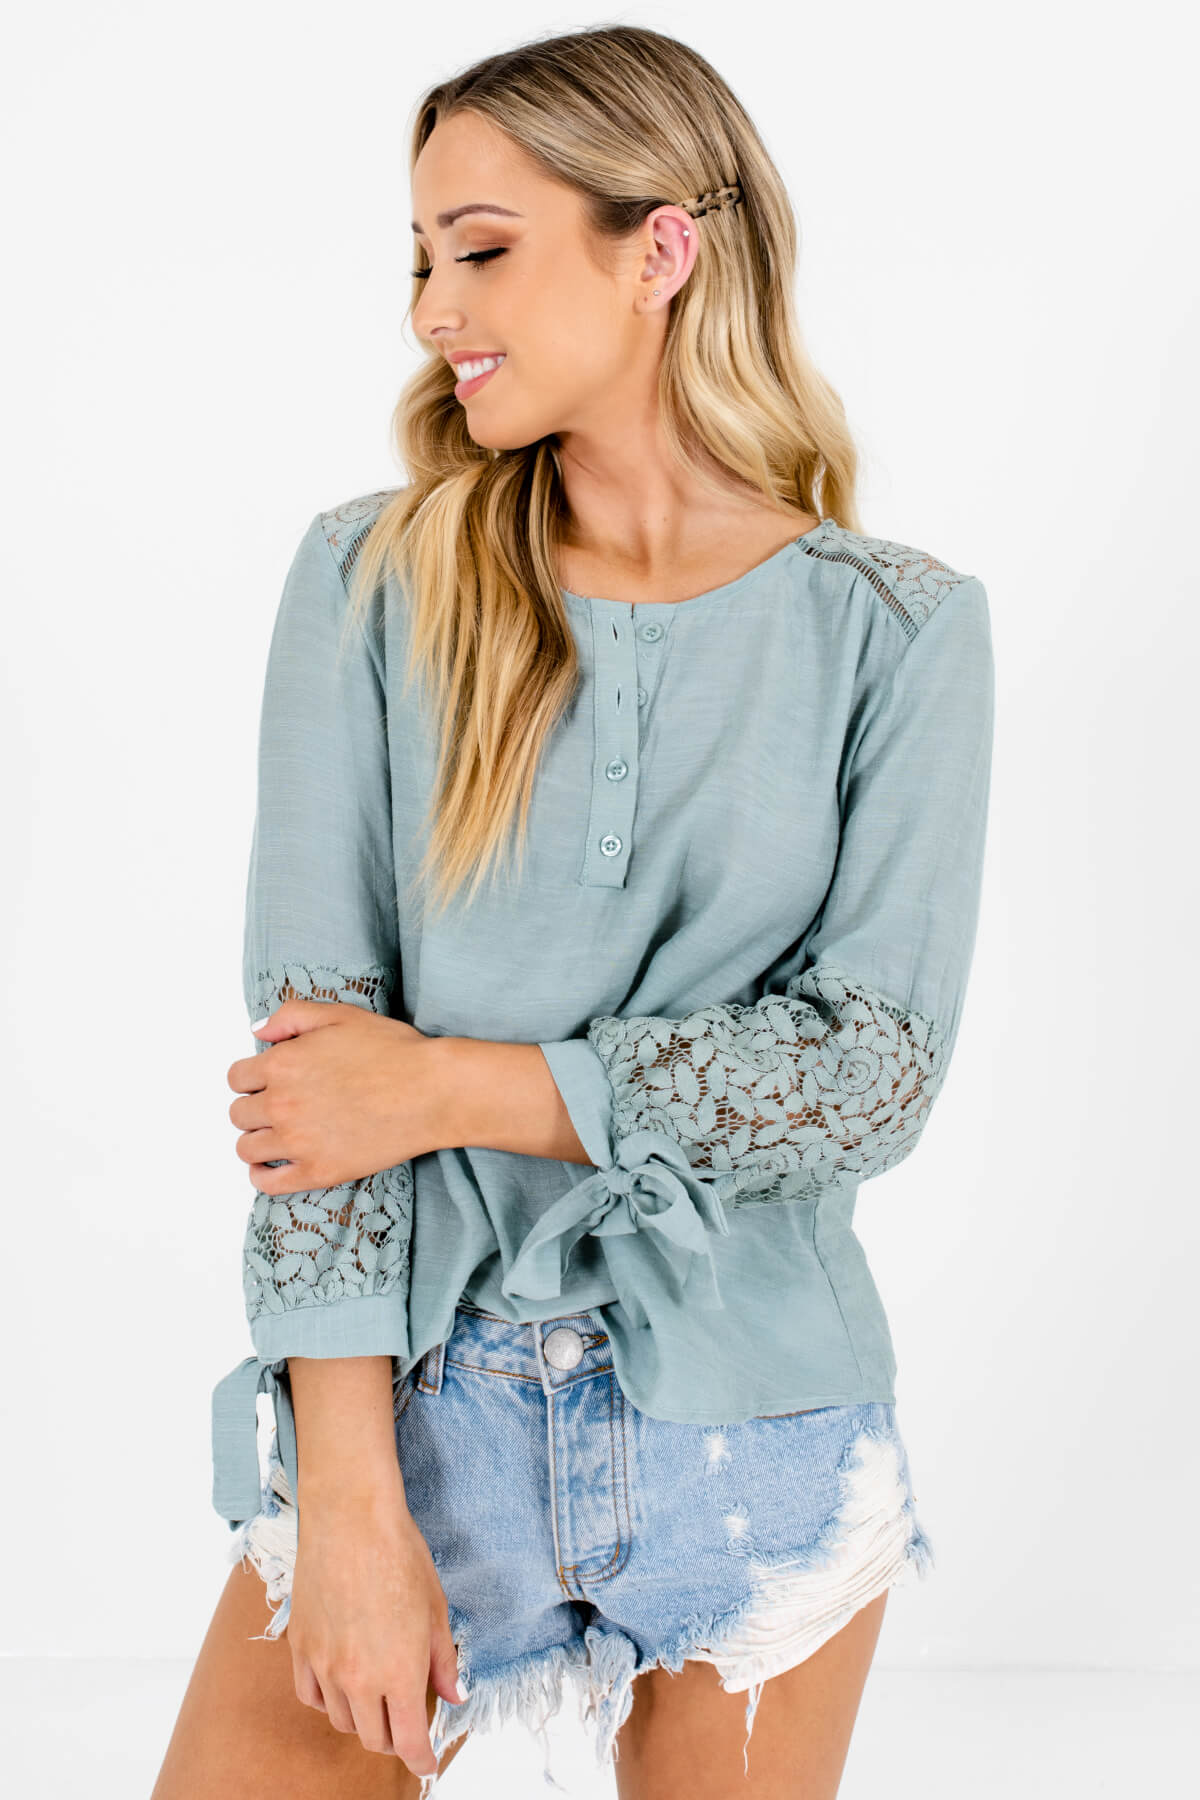 Turquoise Blue 3/4 Sleeve Floral Crochet Lace Tops for Women